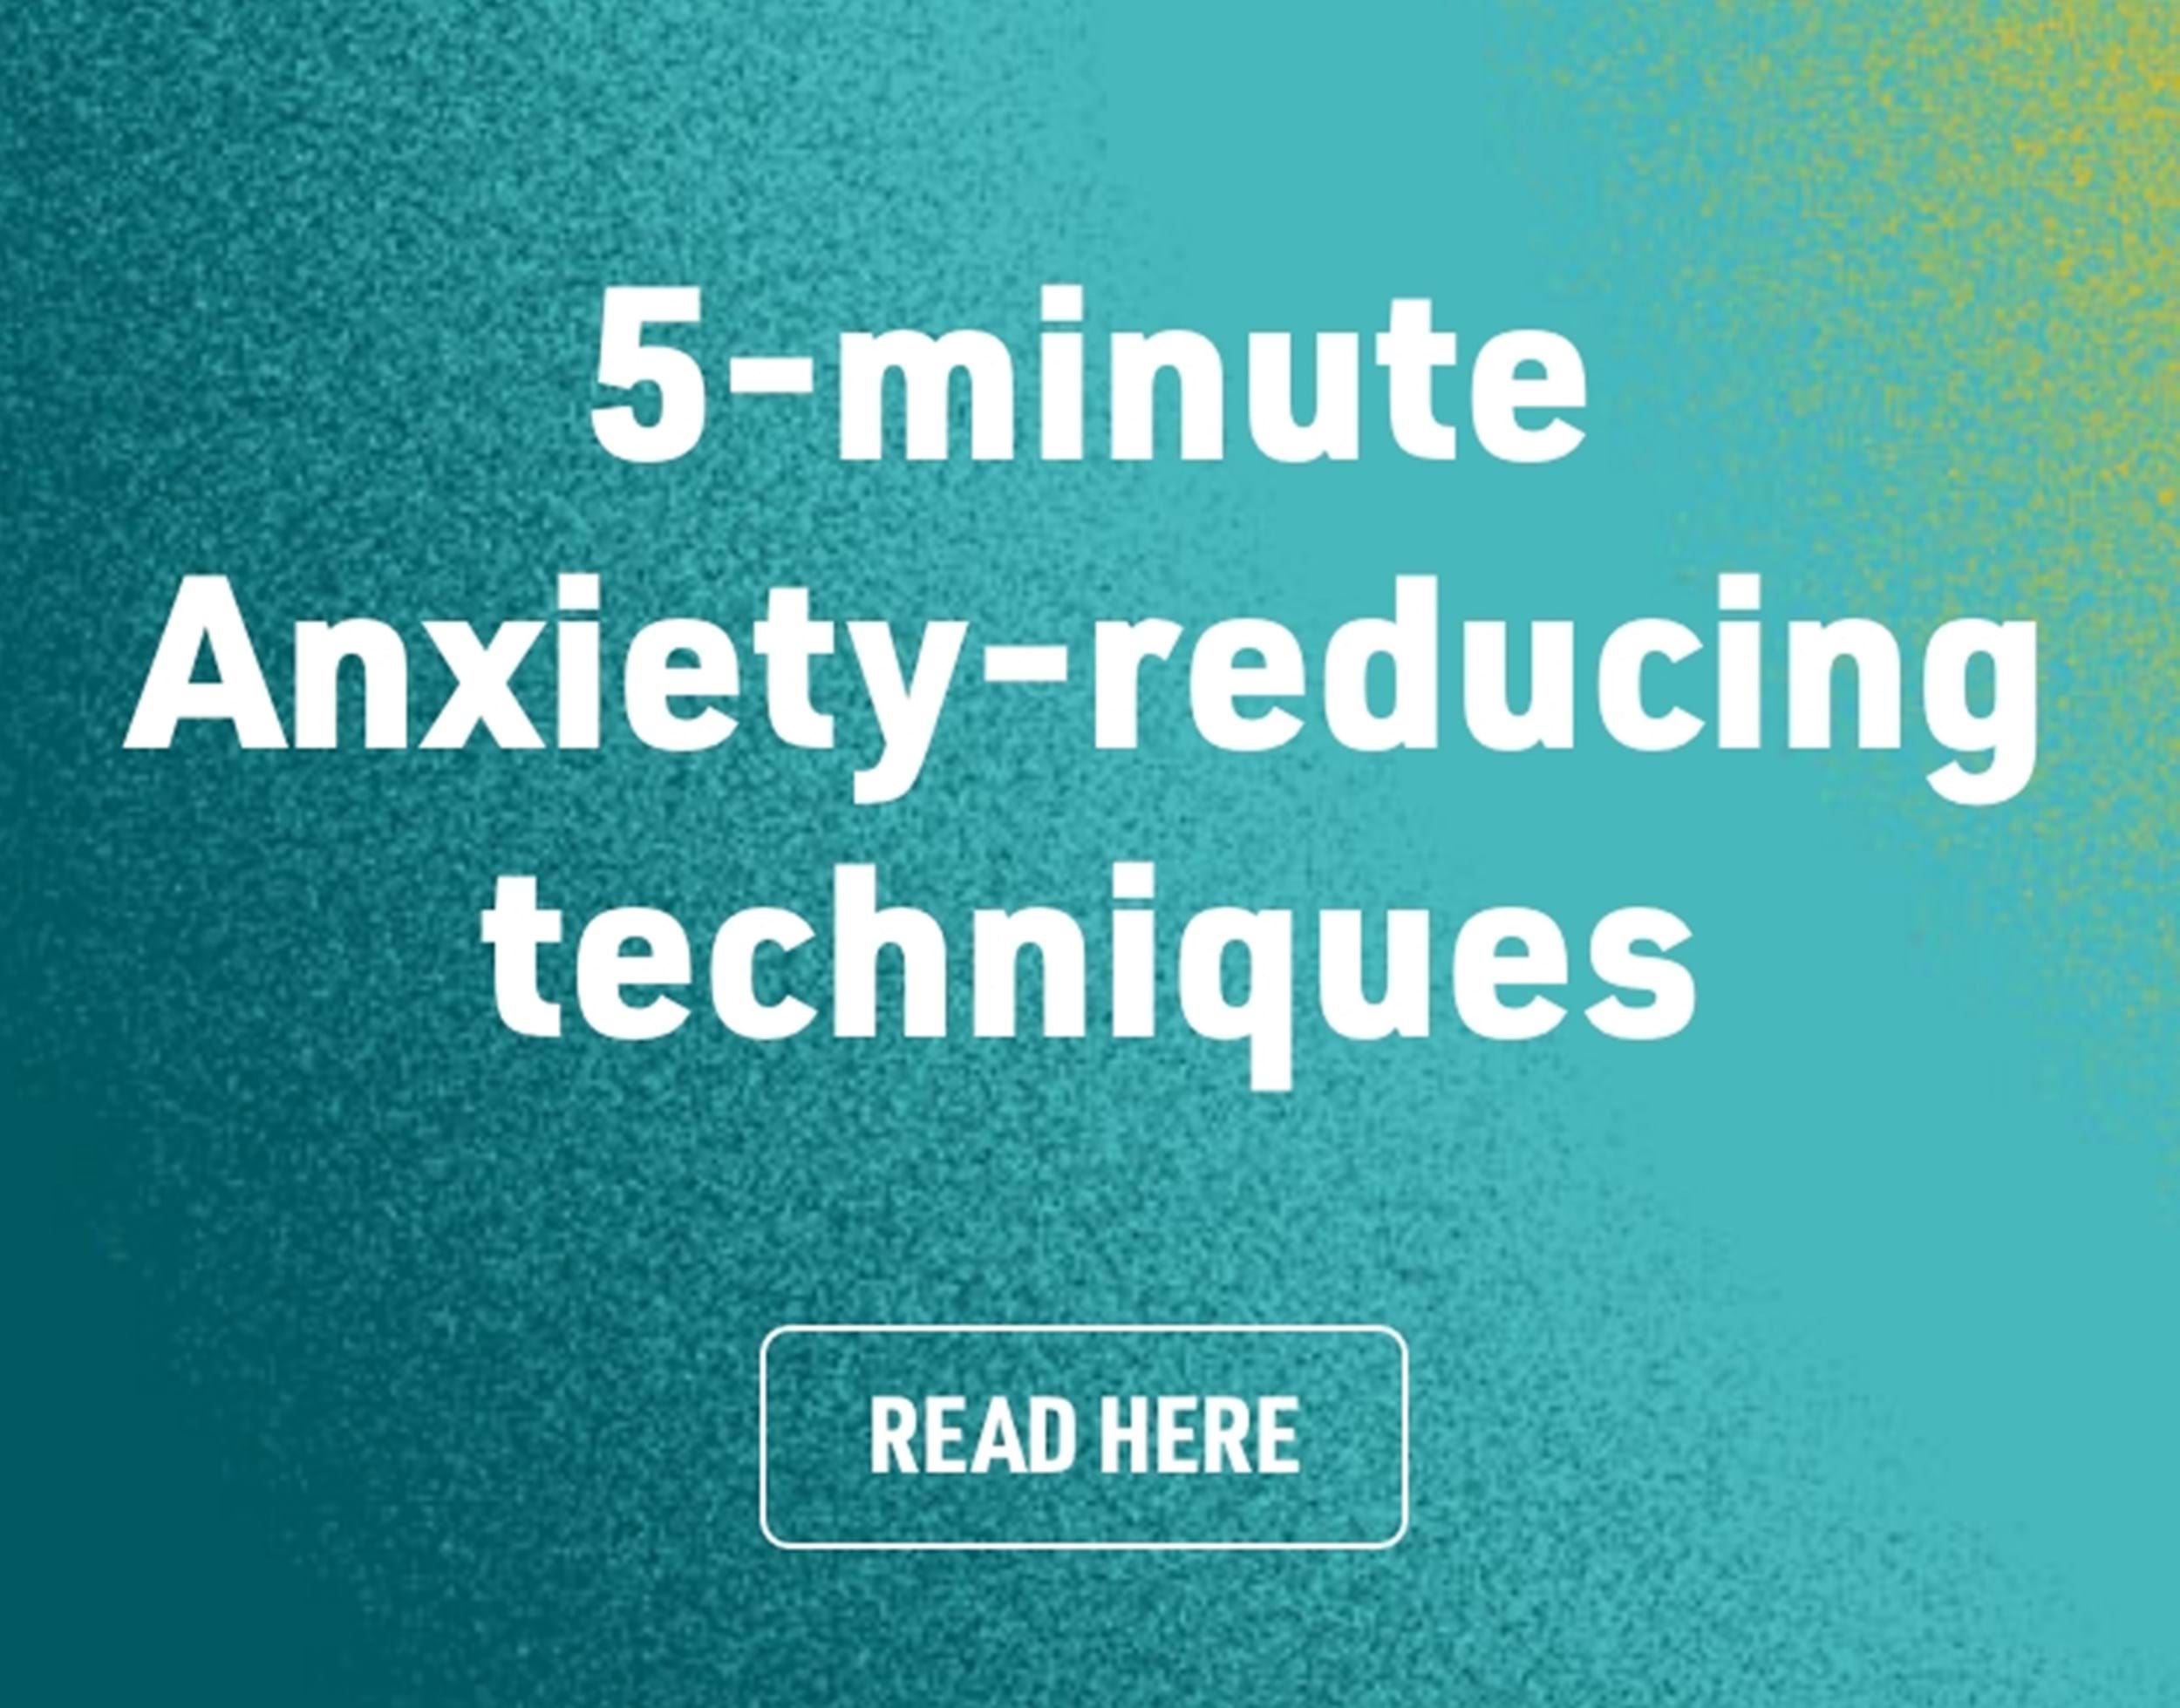 5-minute anxiety-reducing techniques